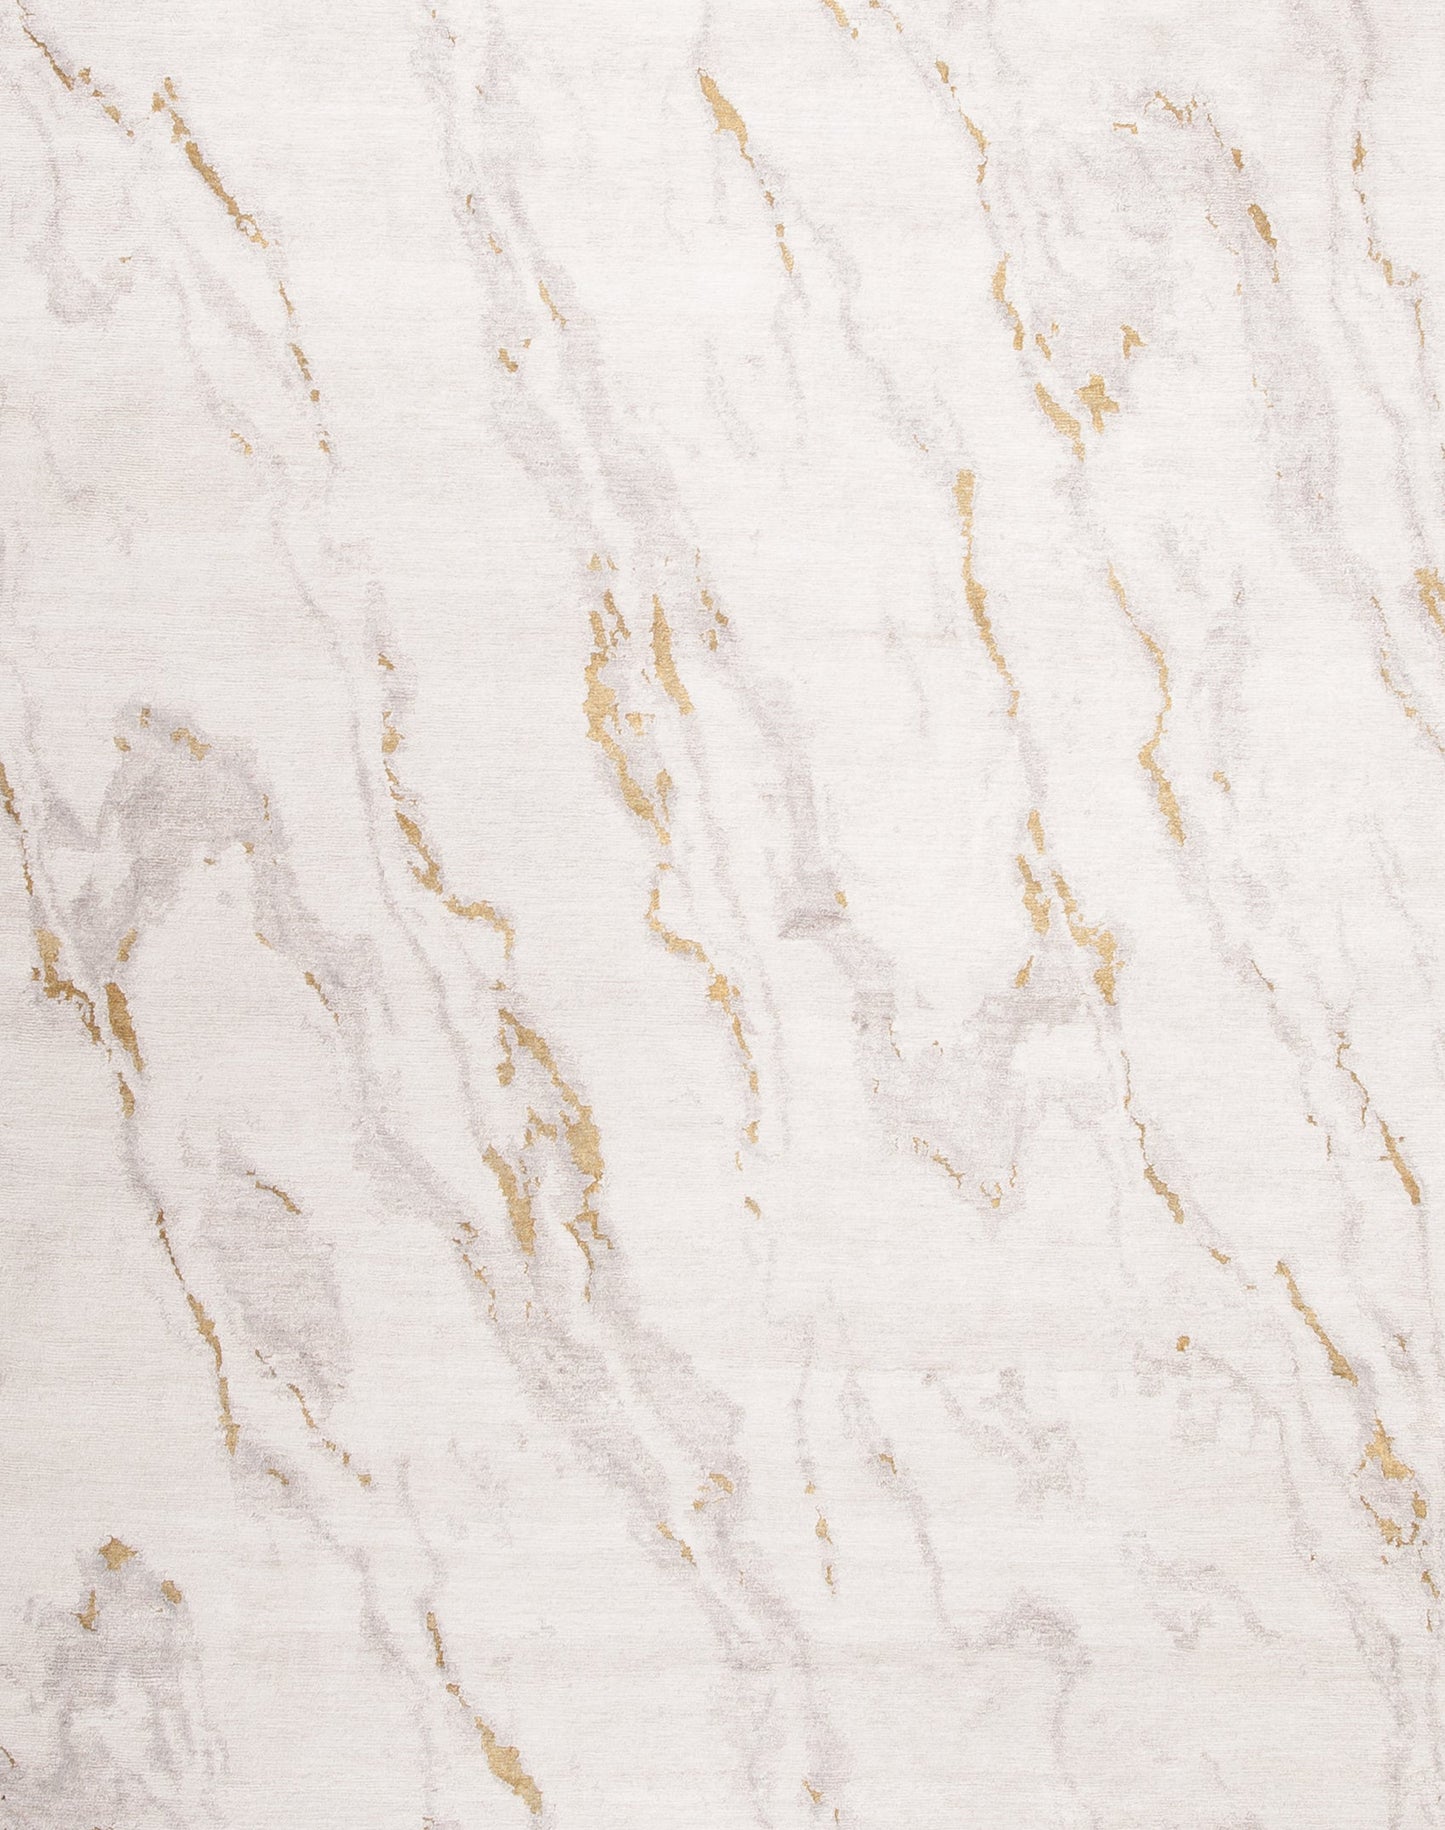 This close-up renders the marble design with a beautiful caramel tone.